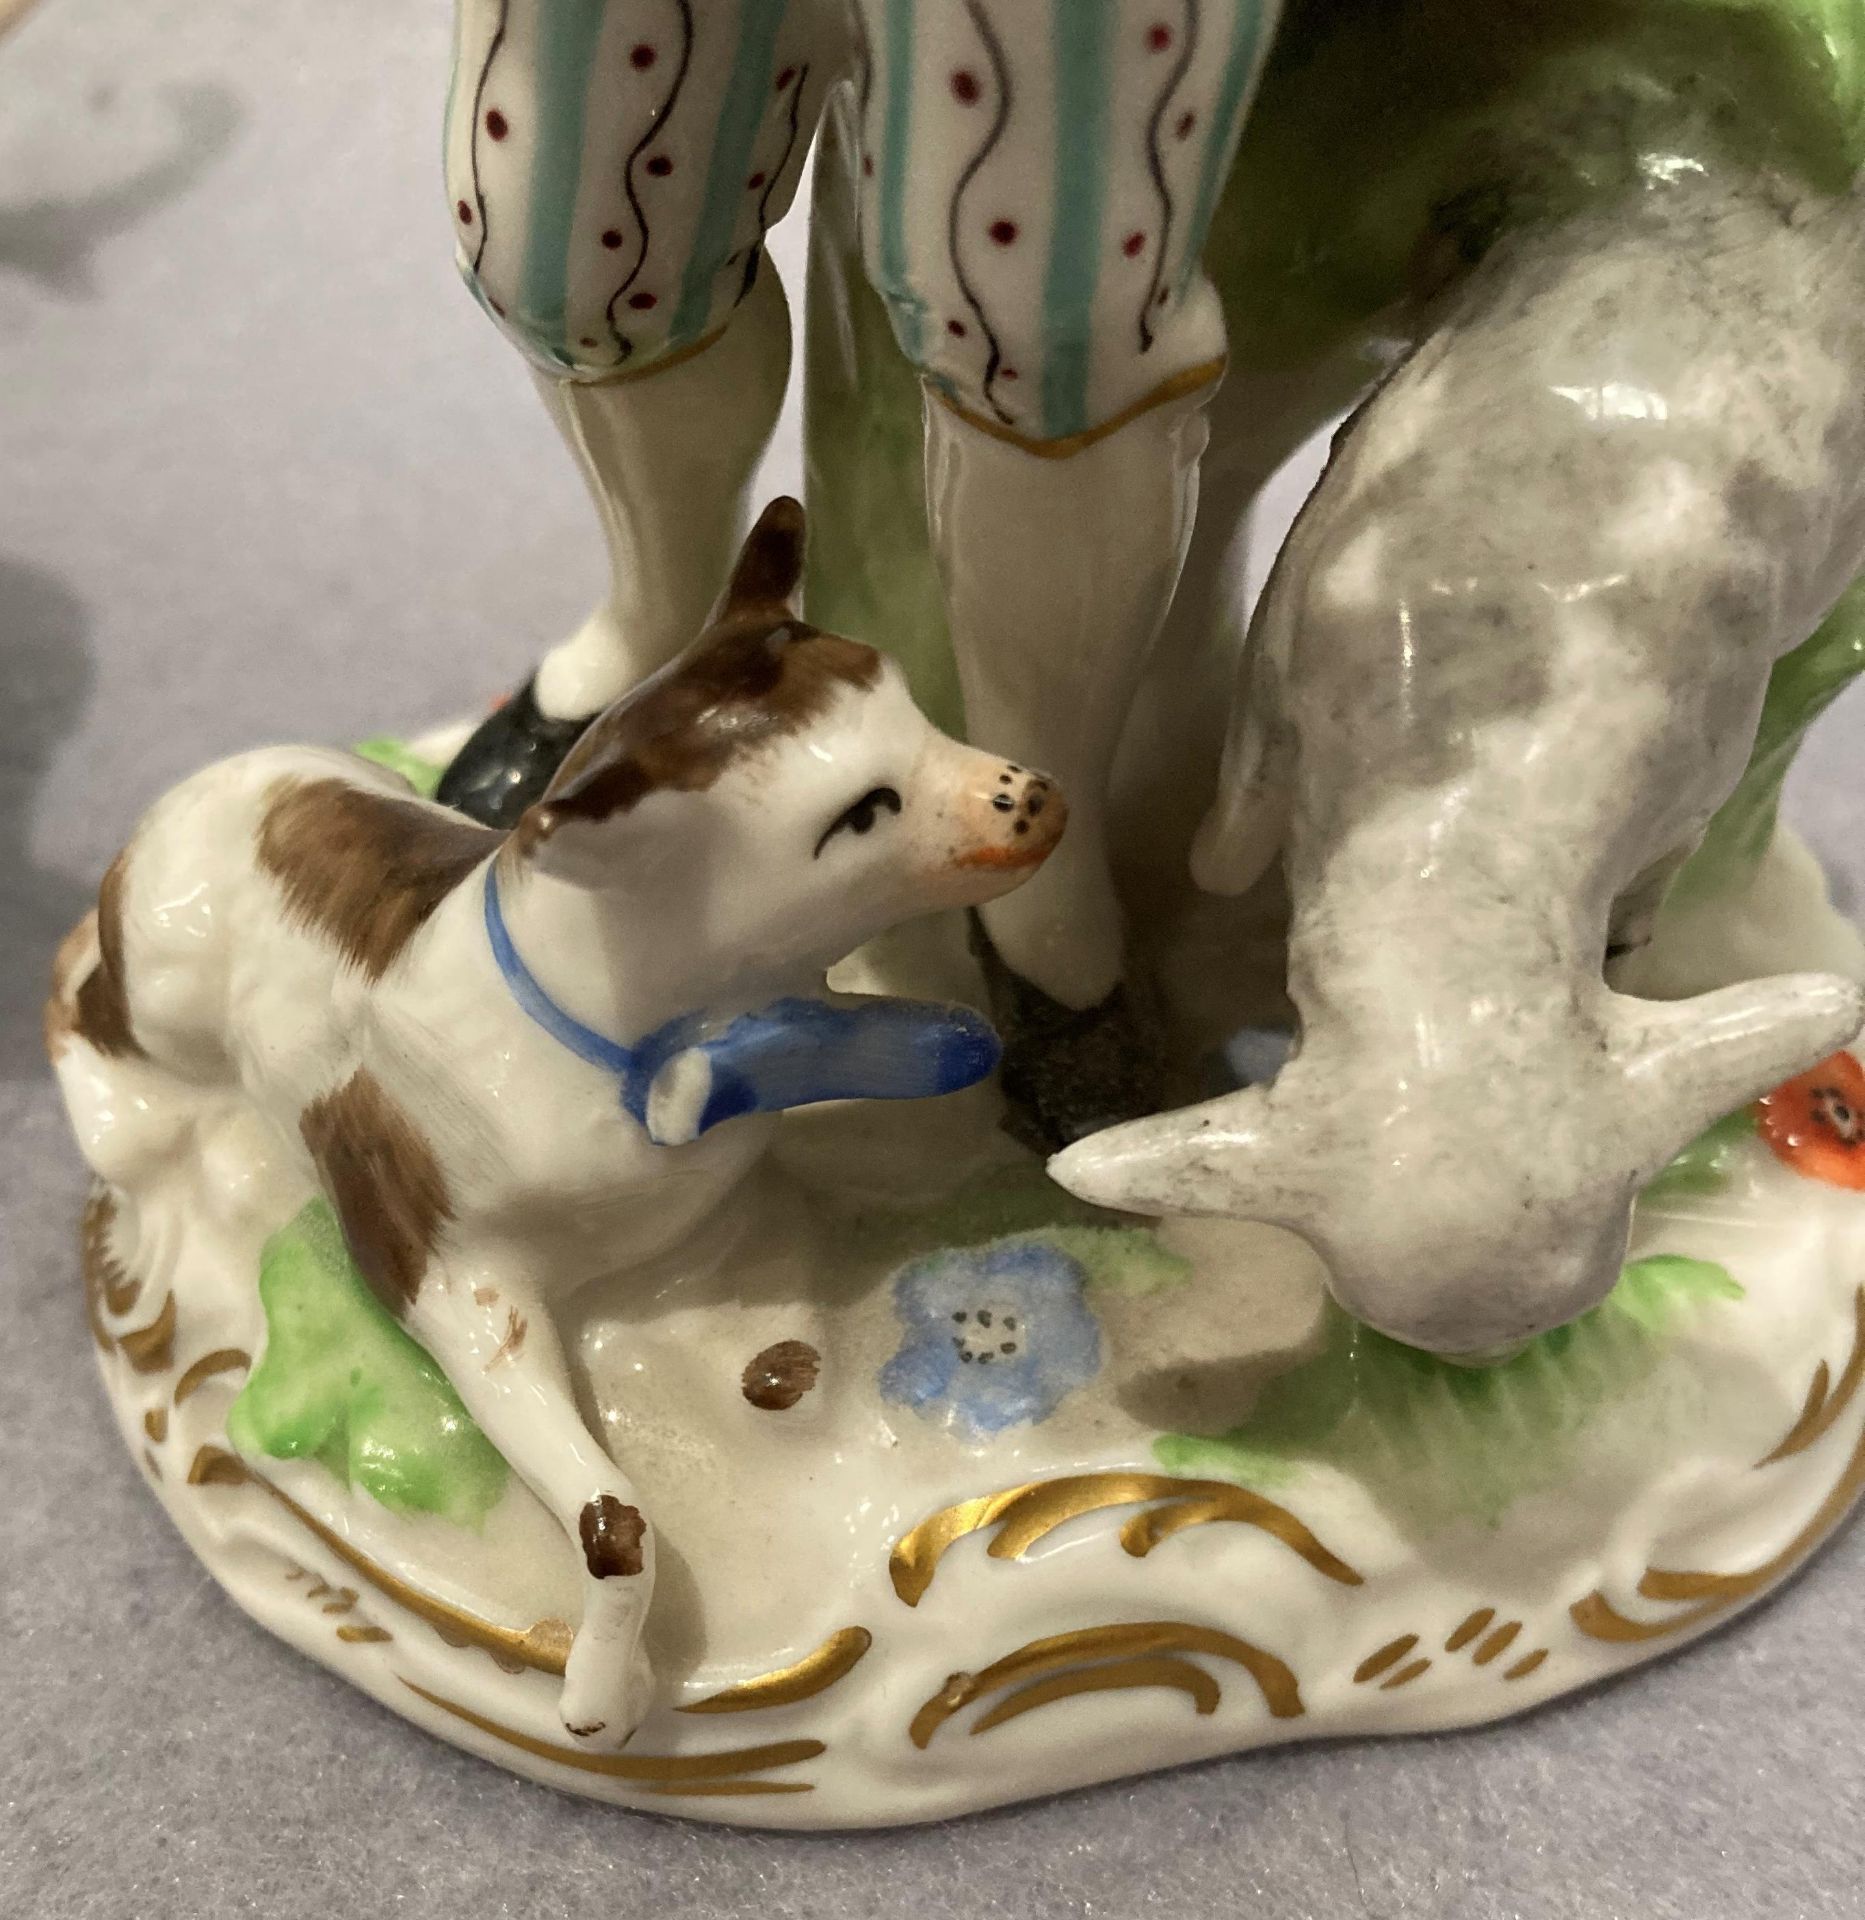 Pair of porcelain figurines, man and woman with animals, damage to the man's animal with bow, - Image 6 of 6